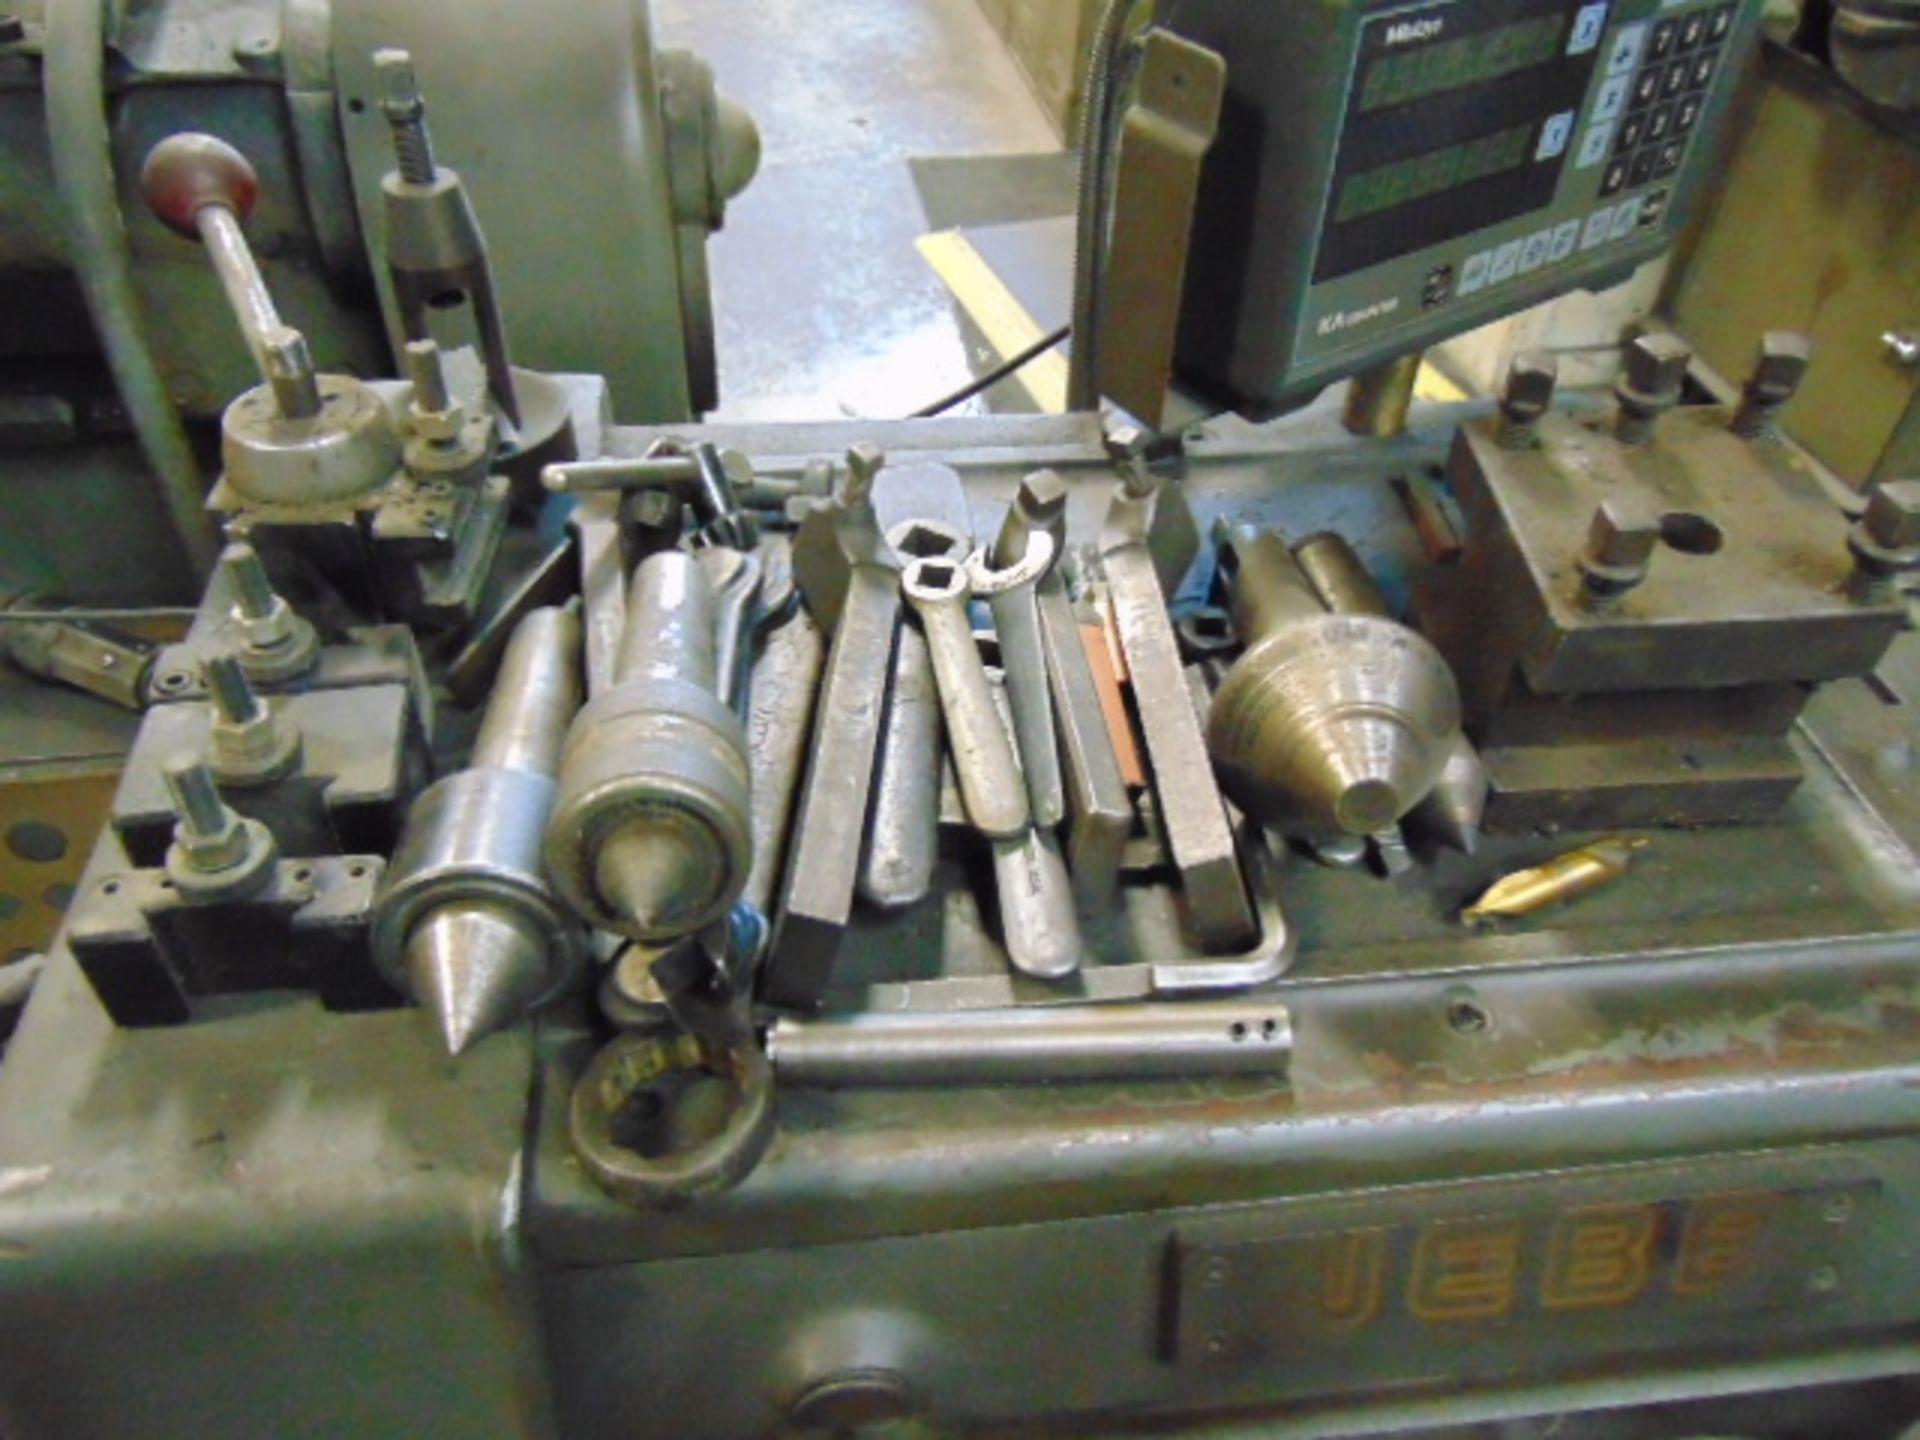 GAP BED ENGINE LATHE, WEBB 17” X 40” MDL. 17GX40, 5 HP motor, taper attach., 5 C lever activated - Image 12 of 15